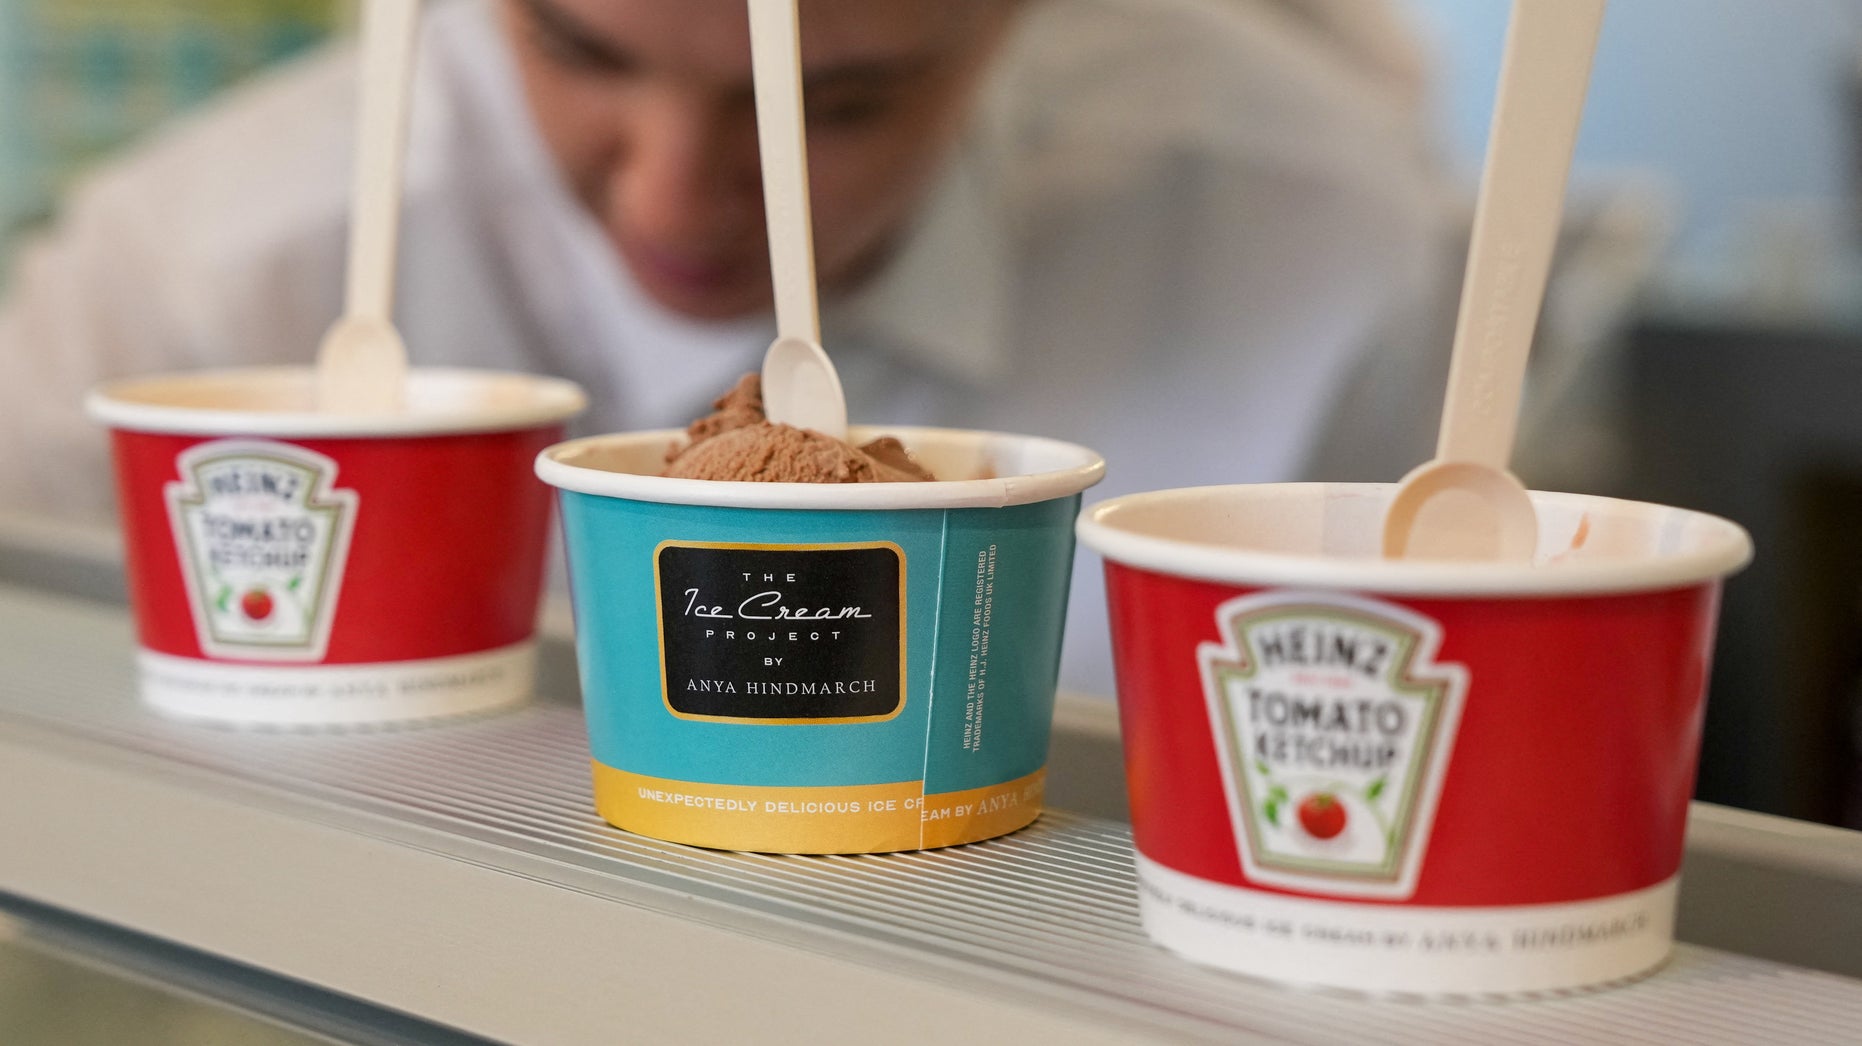 Ketchup, mayo, baked beans ice cream flavors being offered to London consumers — FOX Business